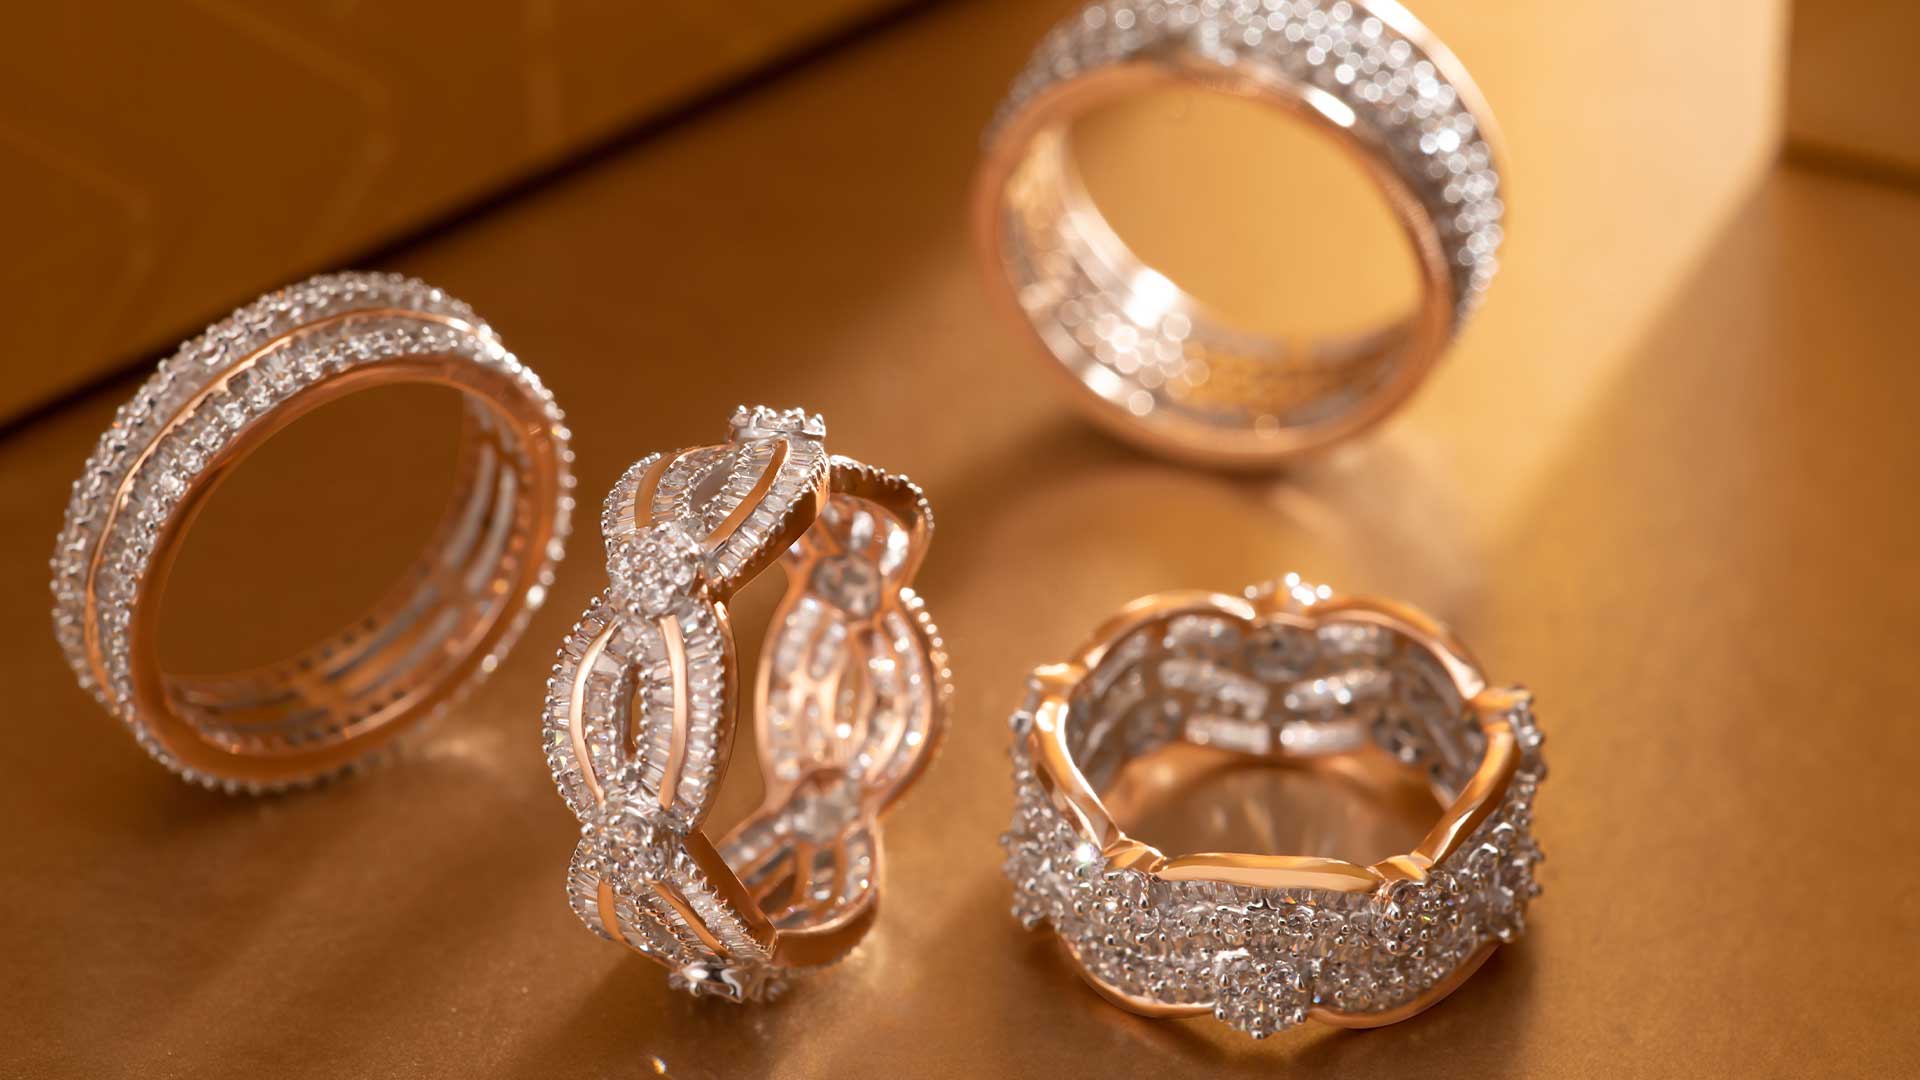 Which Finger Does Your Engagement Ring Go On? | Hatton Garden Diamond